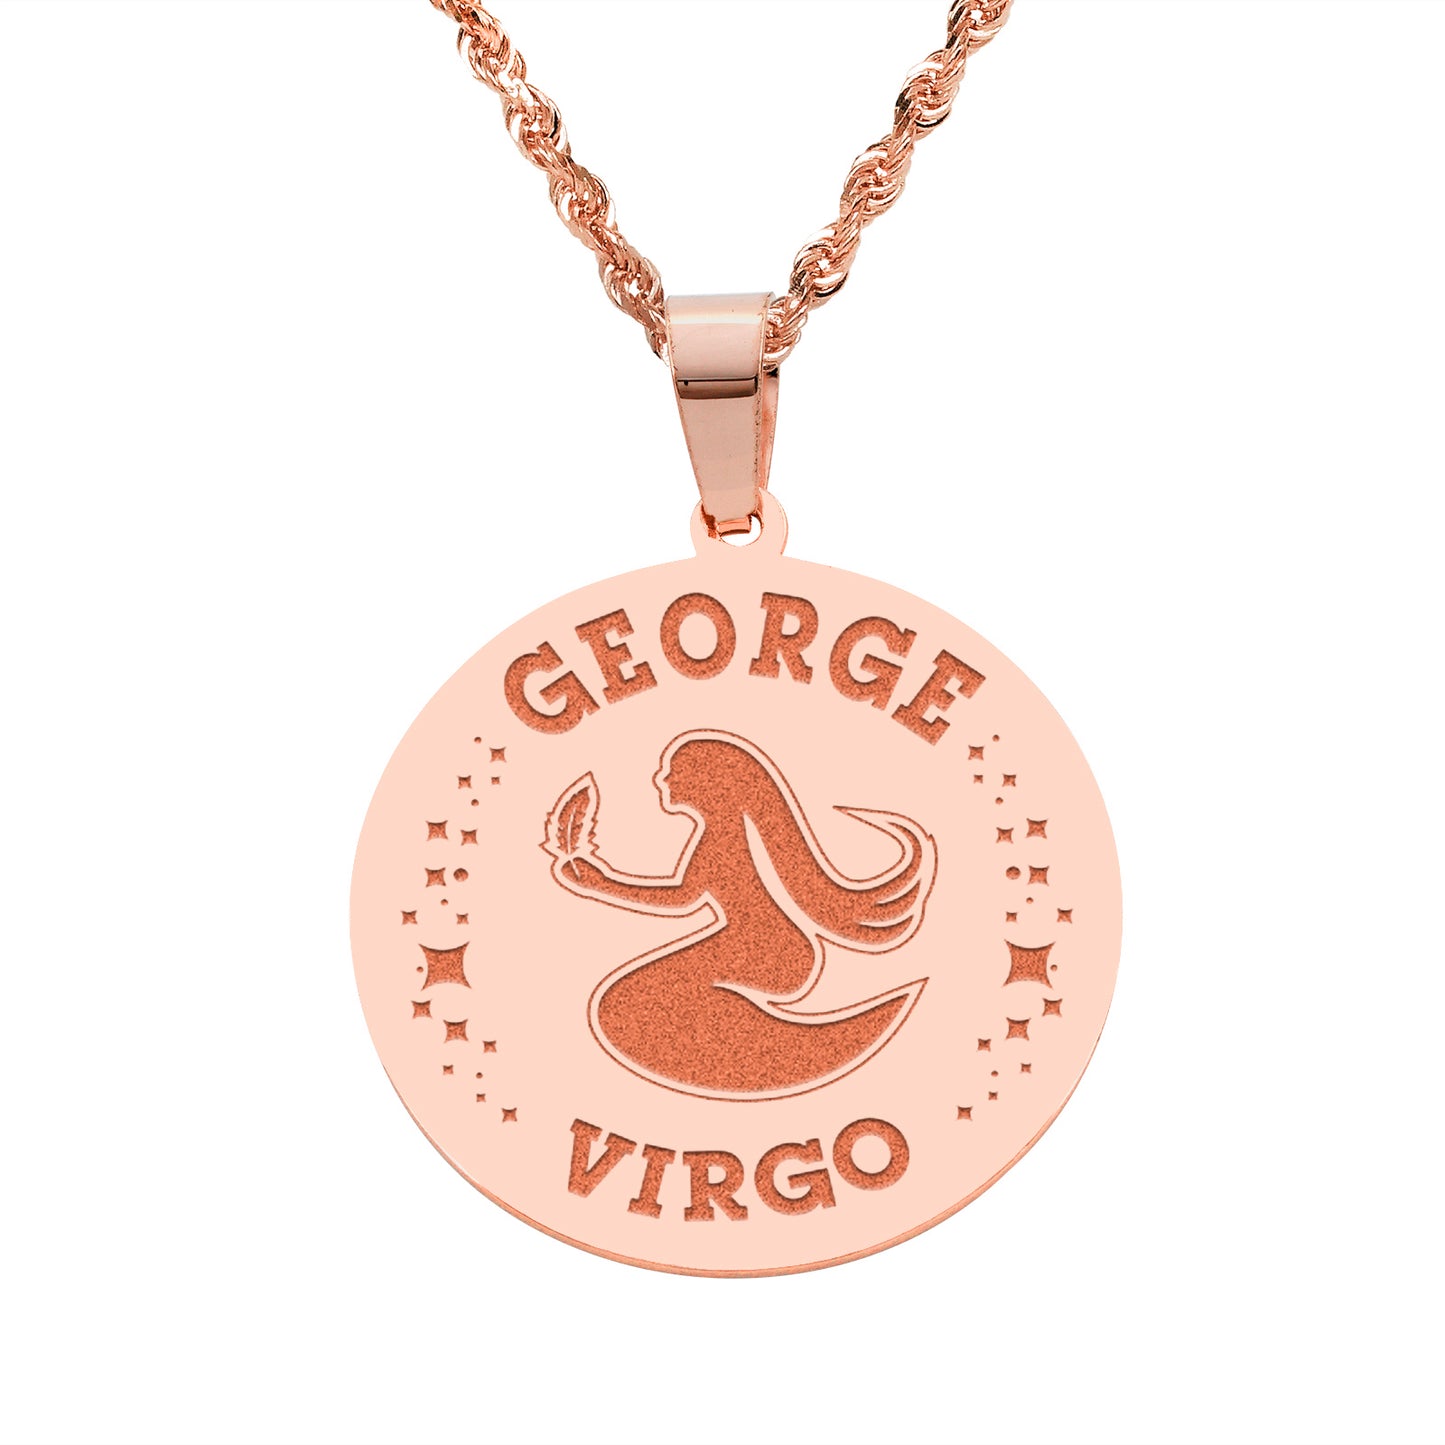 Zodiac Engraved Pendant with Customizable Name in High Polished 14K Gold | 0.75" Virgo